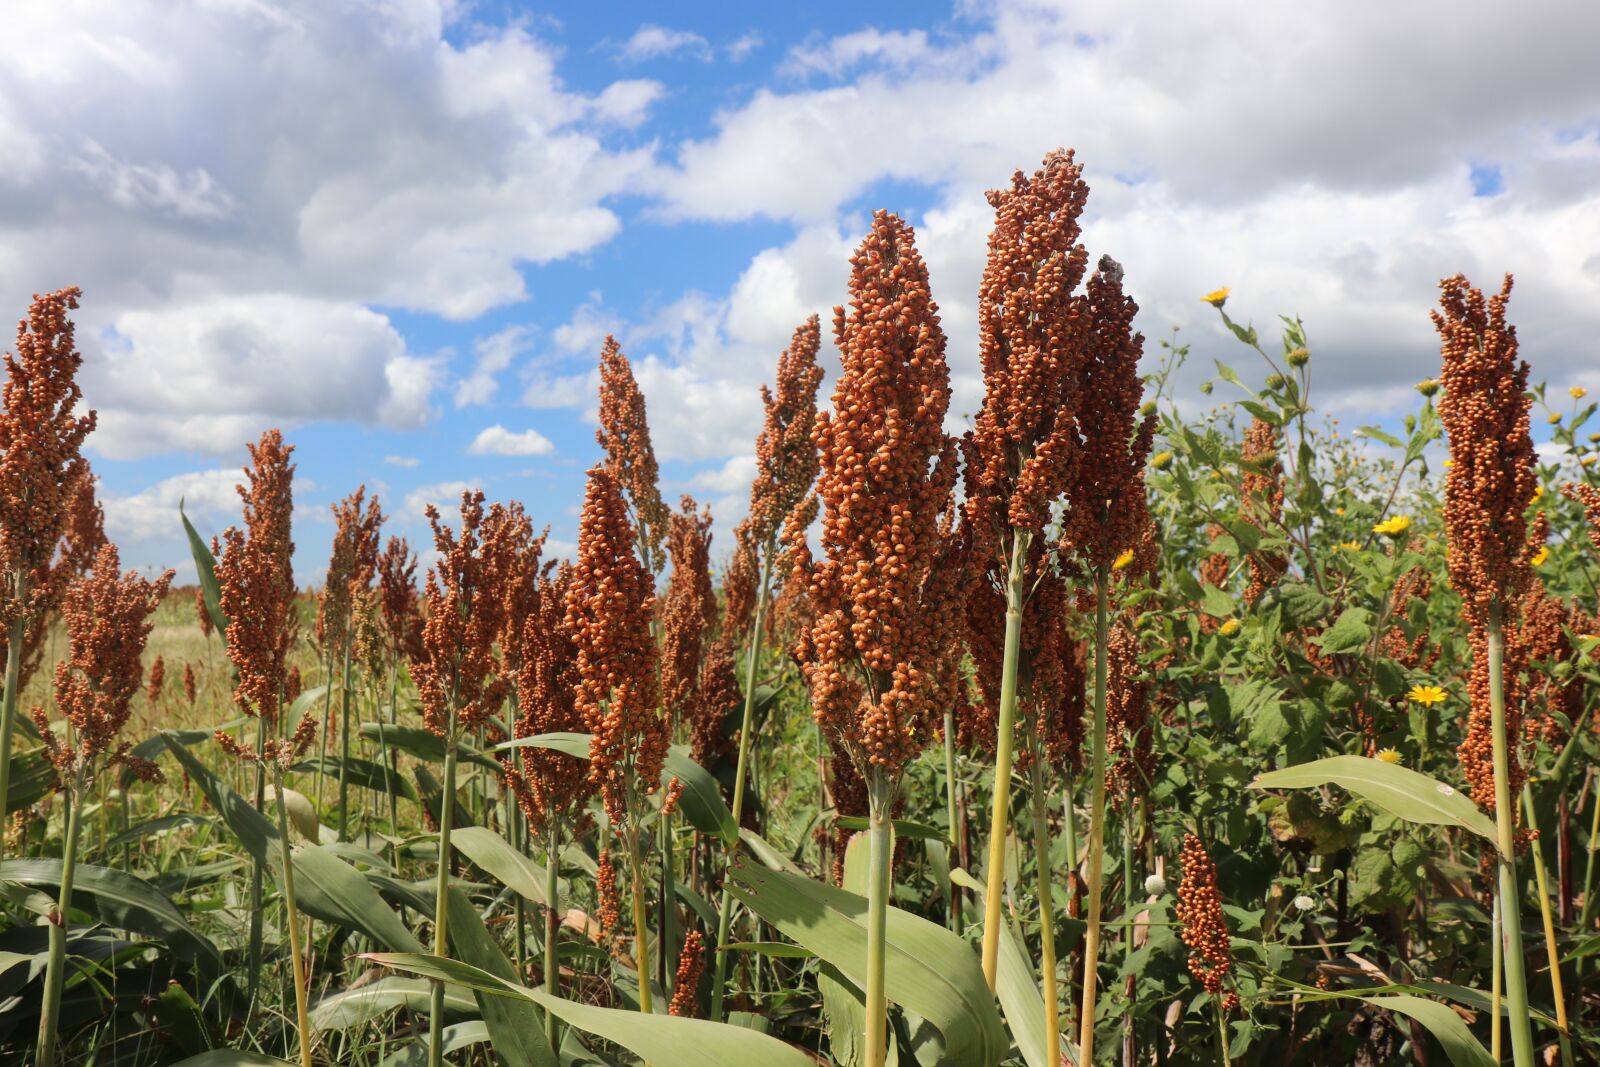 Sigma 12-24mm f/4.5-5.6 EX DG ASPHERICAL HSM + 1.4x sample photo. Sorghum, agriculture, nature photography